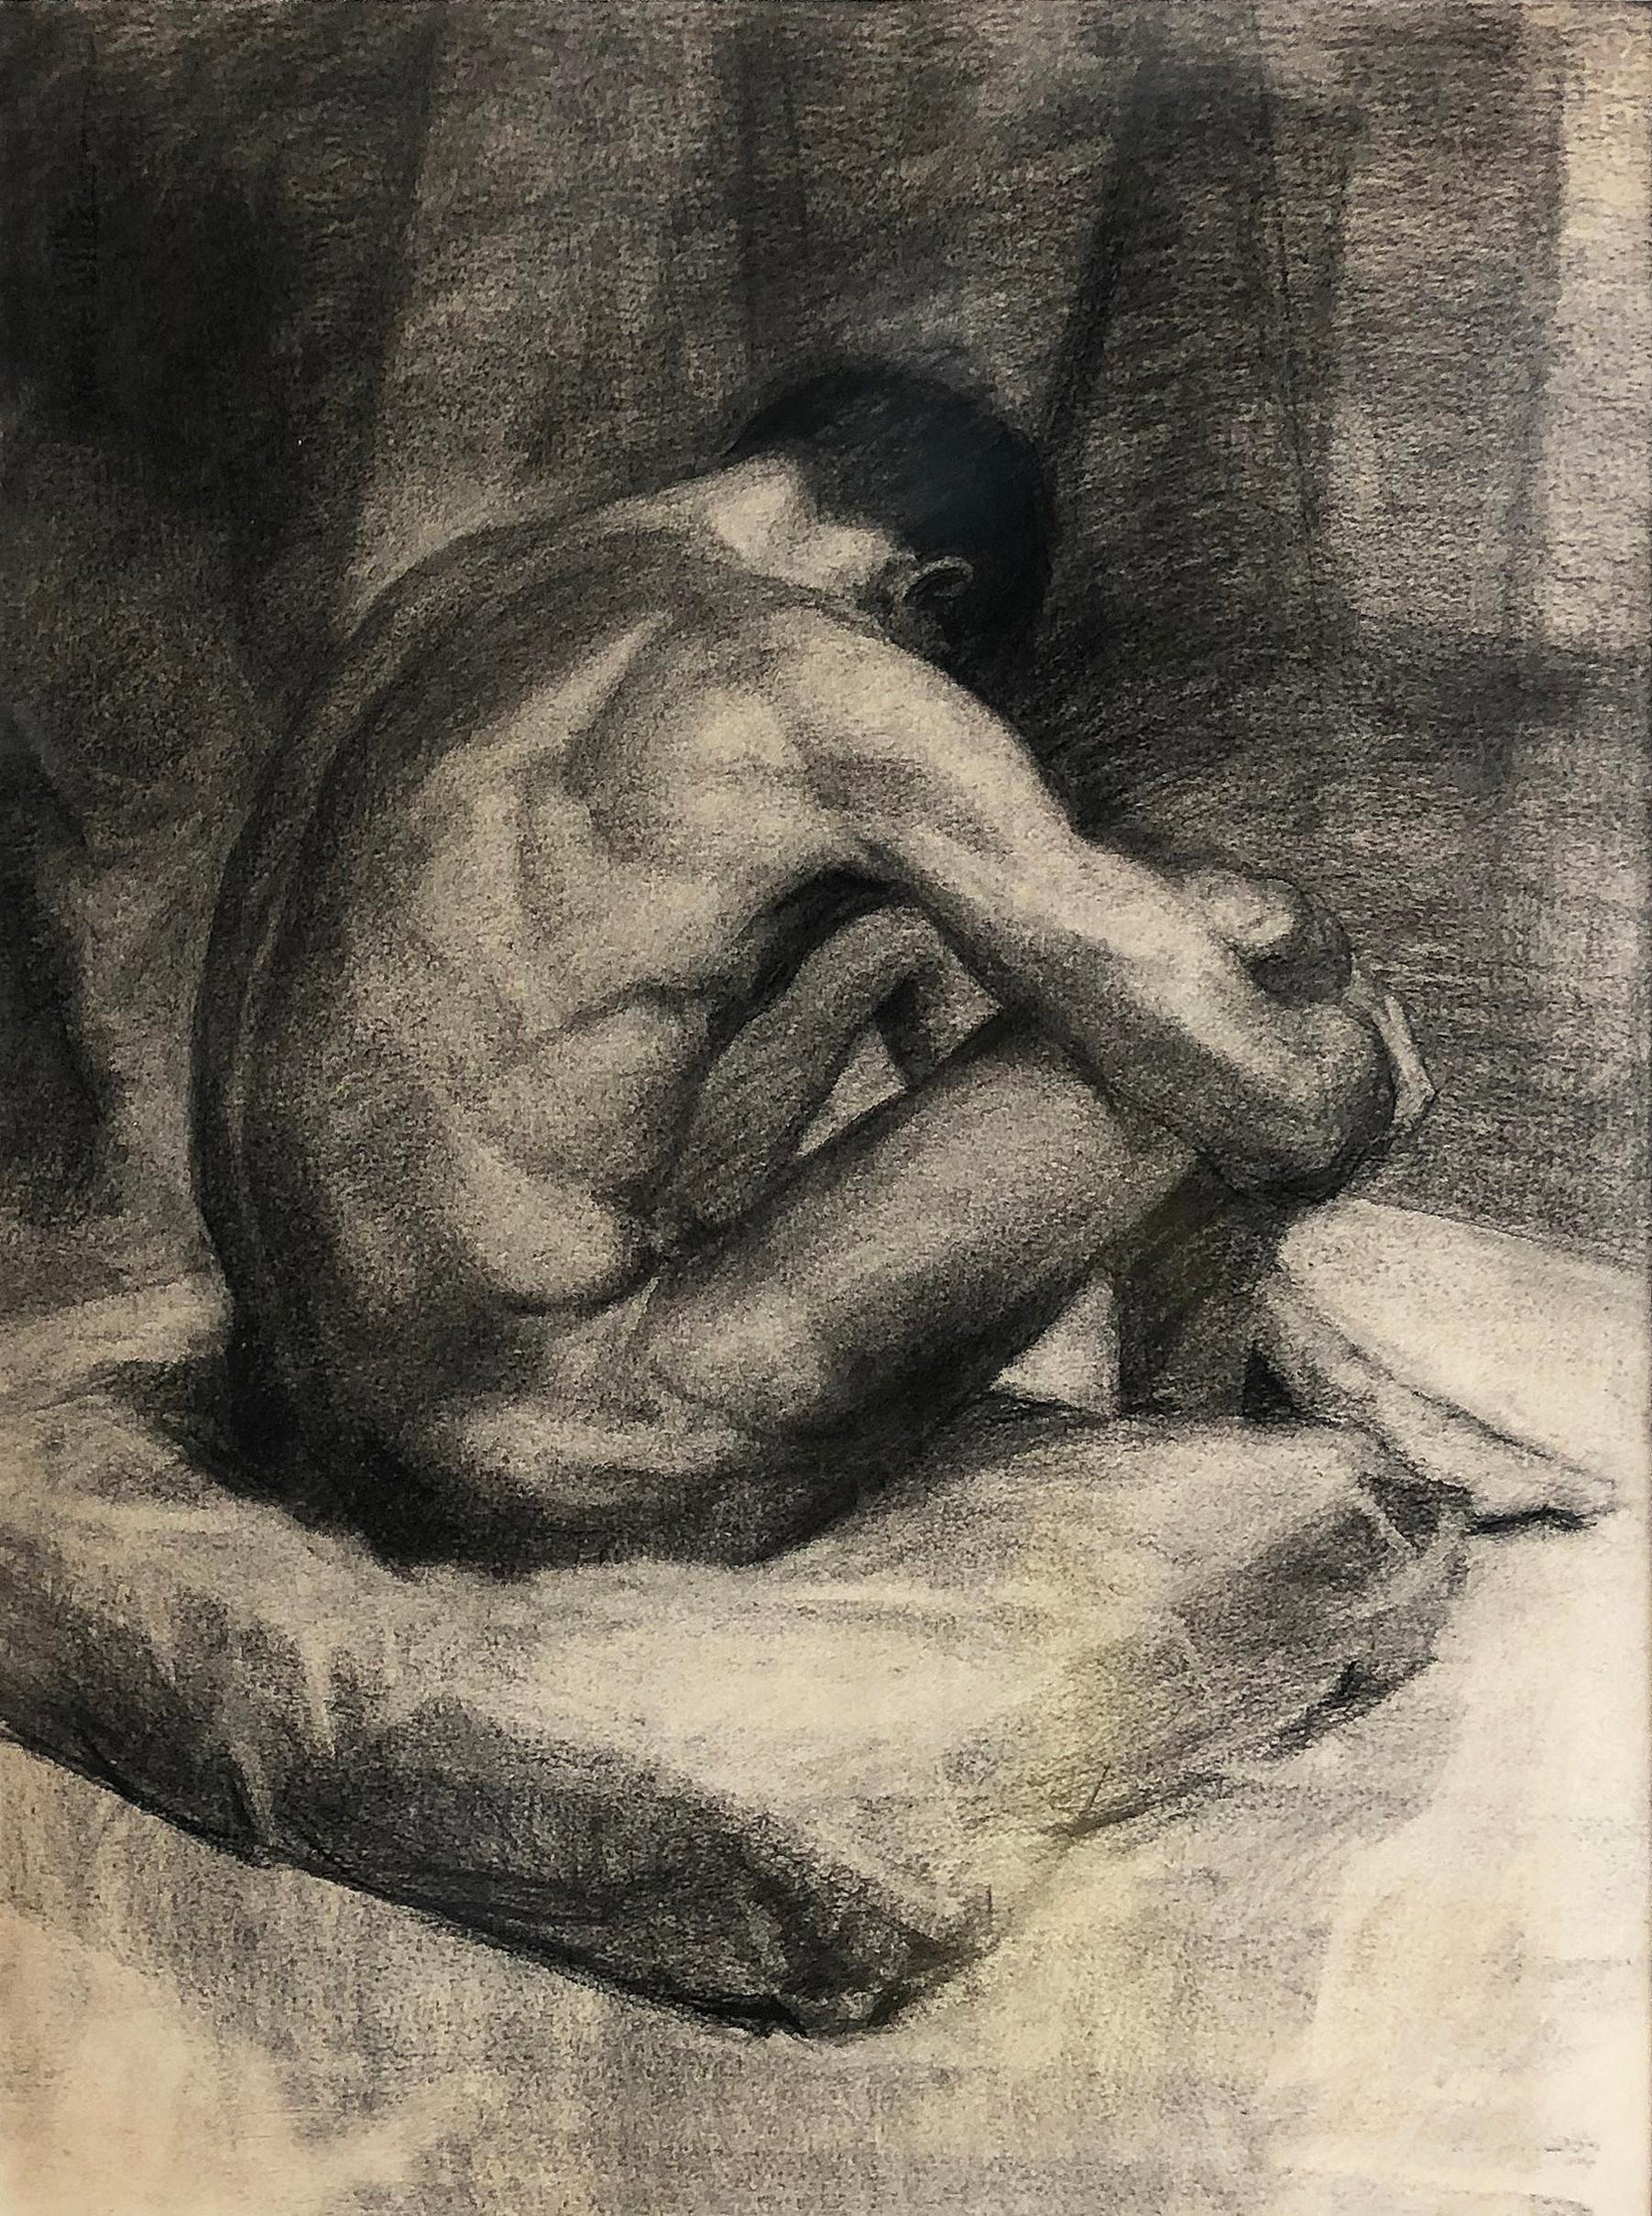 Mid-20th Century 1940s Male Nude Art Study Drawing in Charcoal on Paper